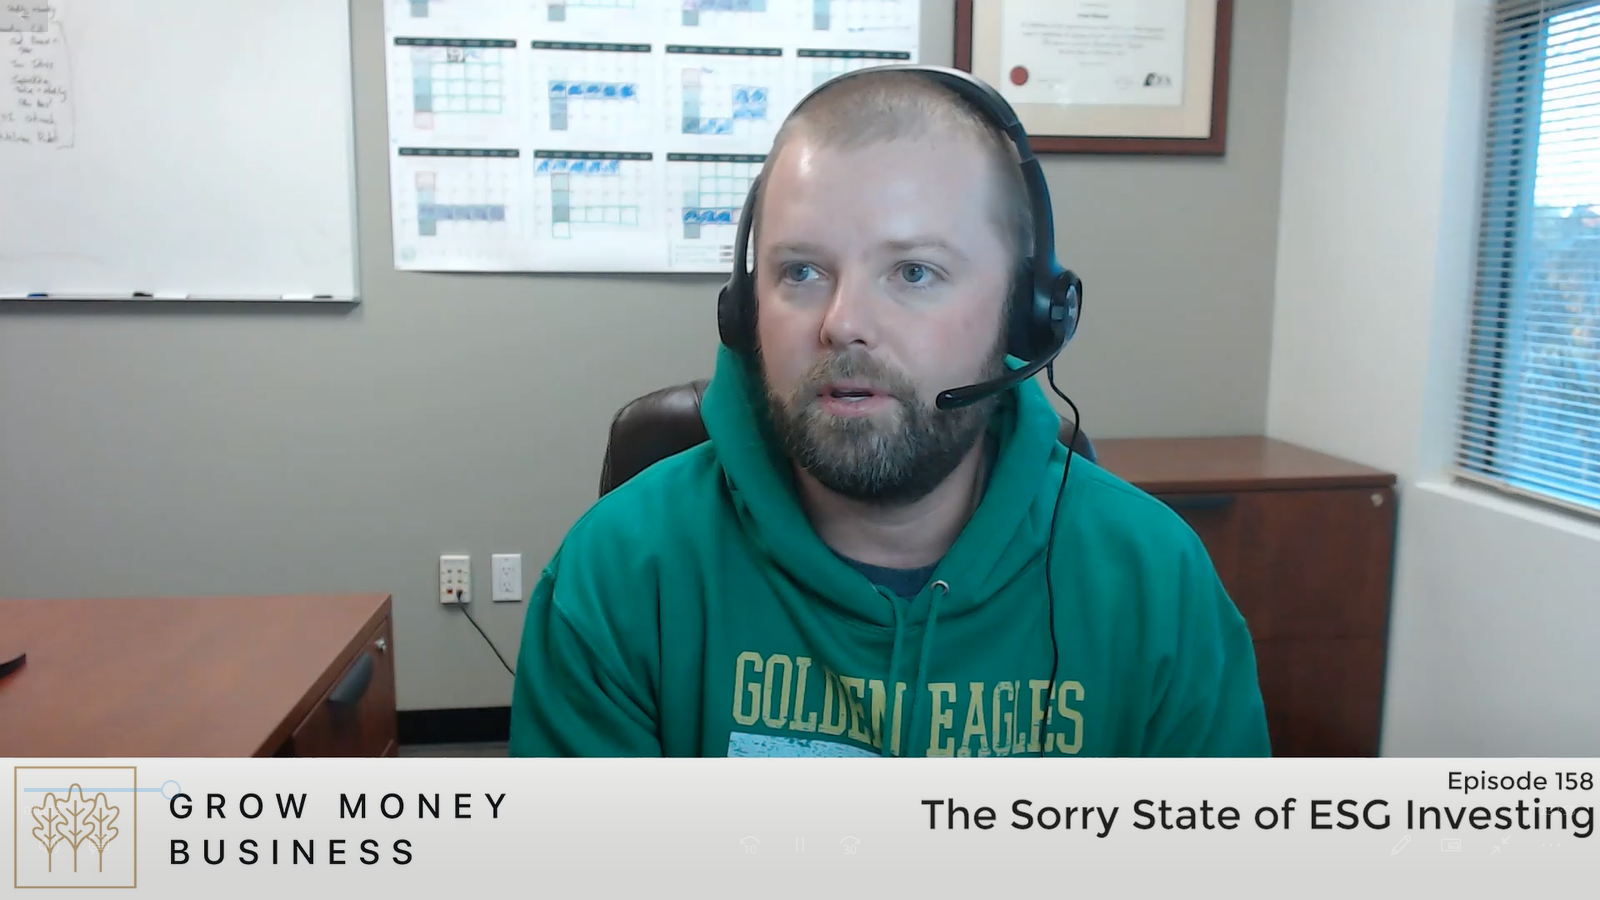 The Sorry State of ESG Investing | Ep 158 main image